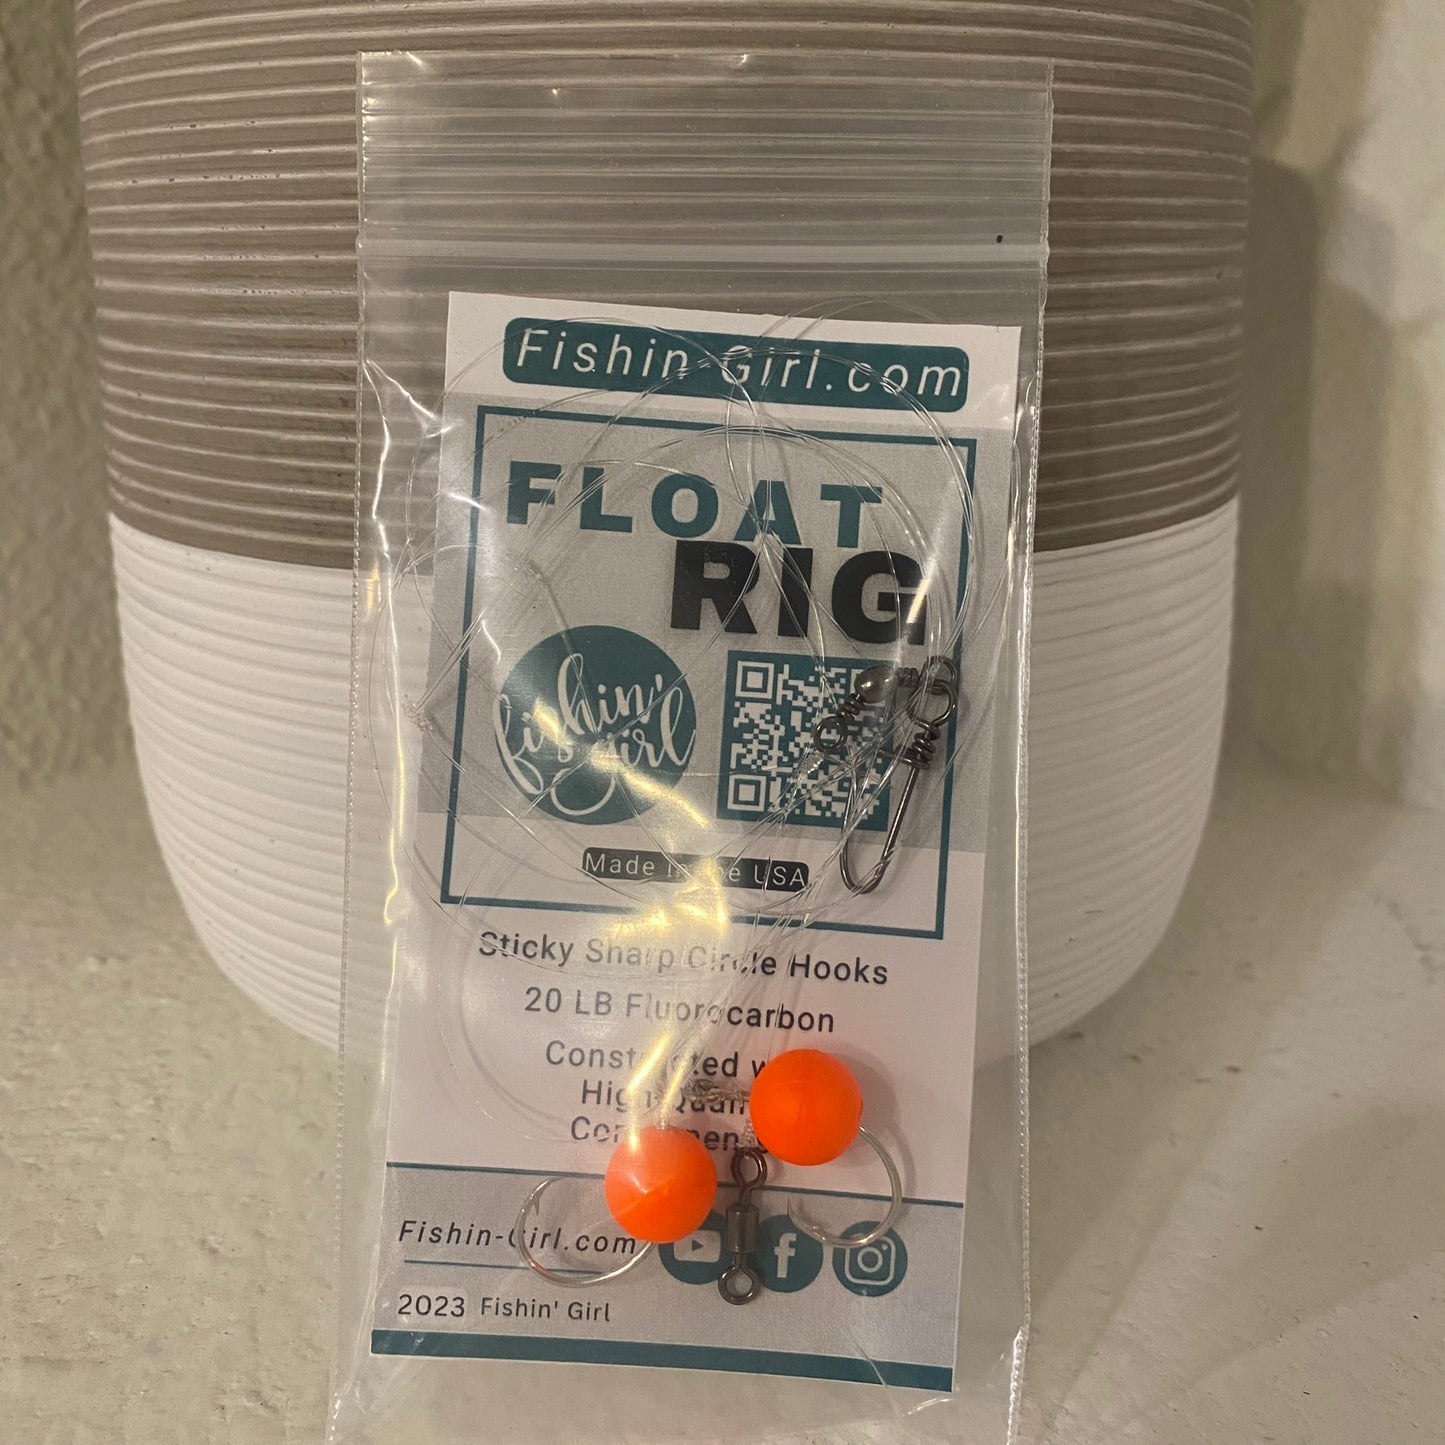 Fishin' Girl Exclusive Float Rigs! (1 rig)